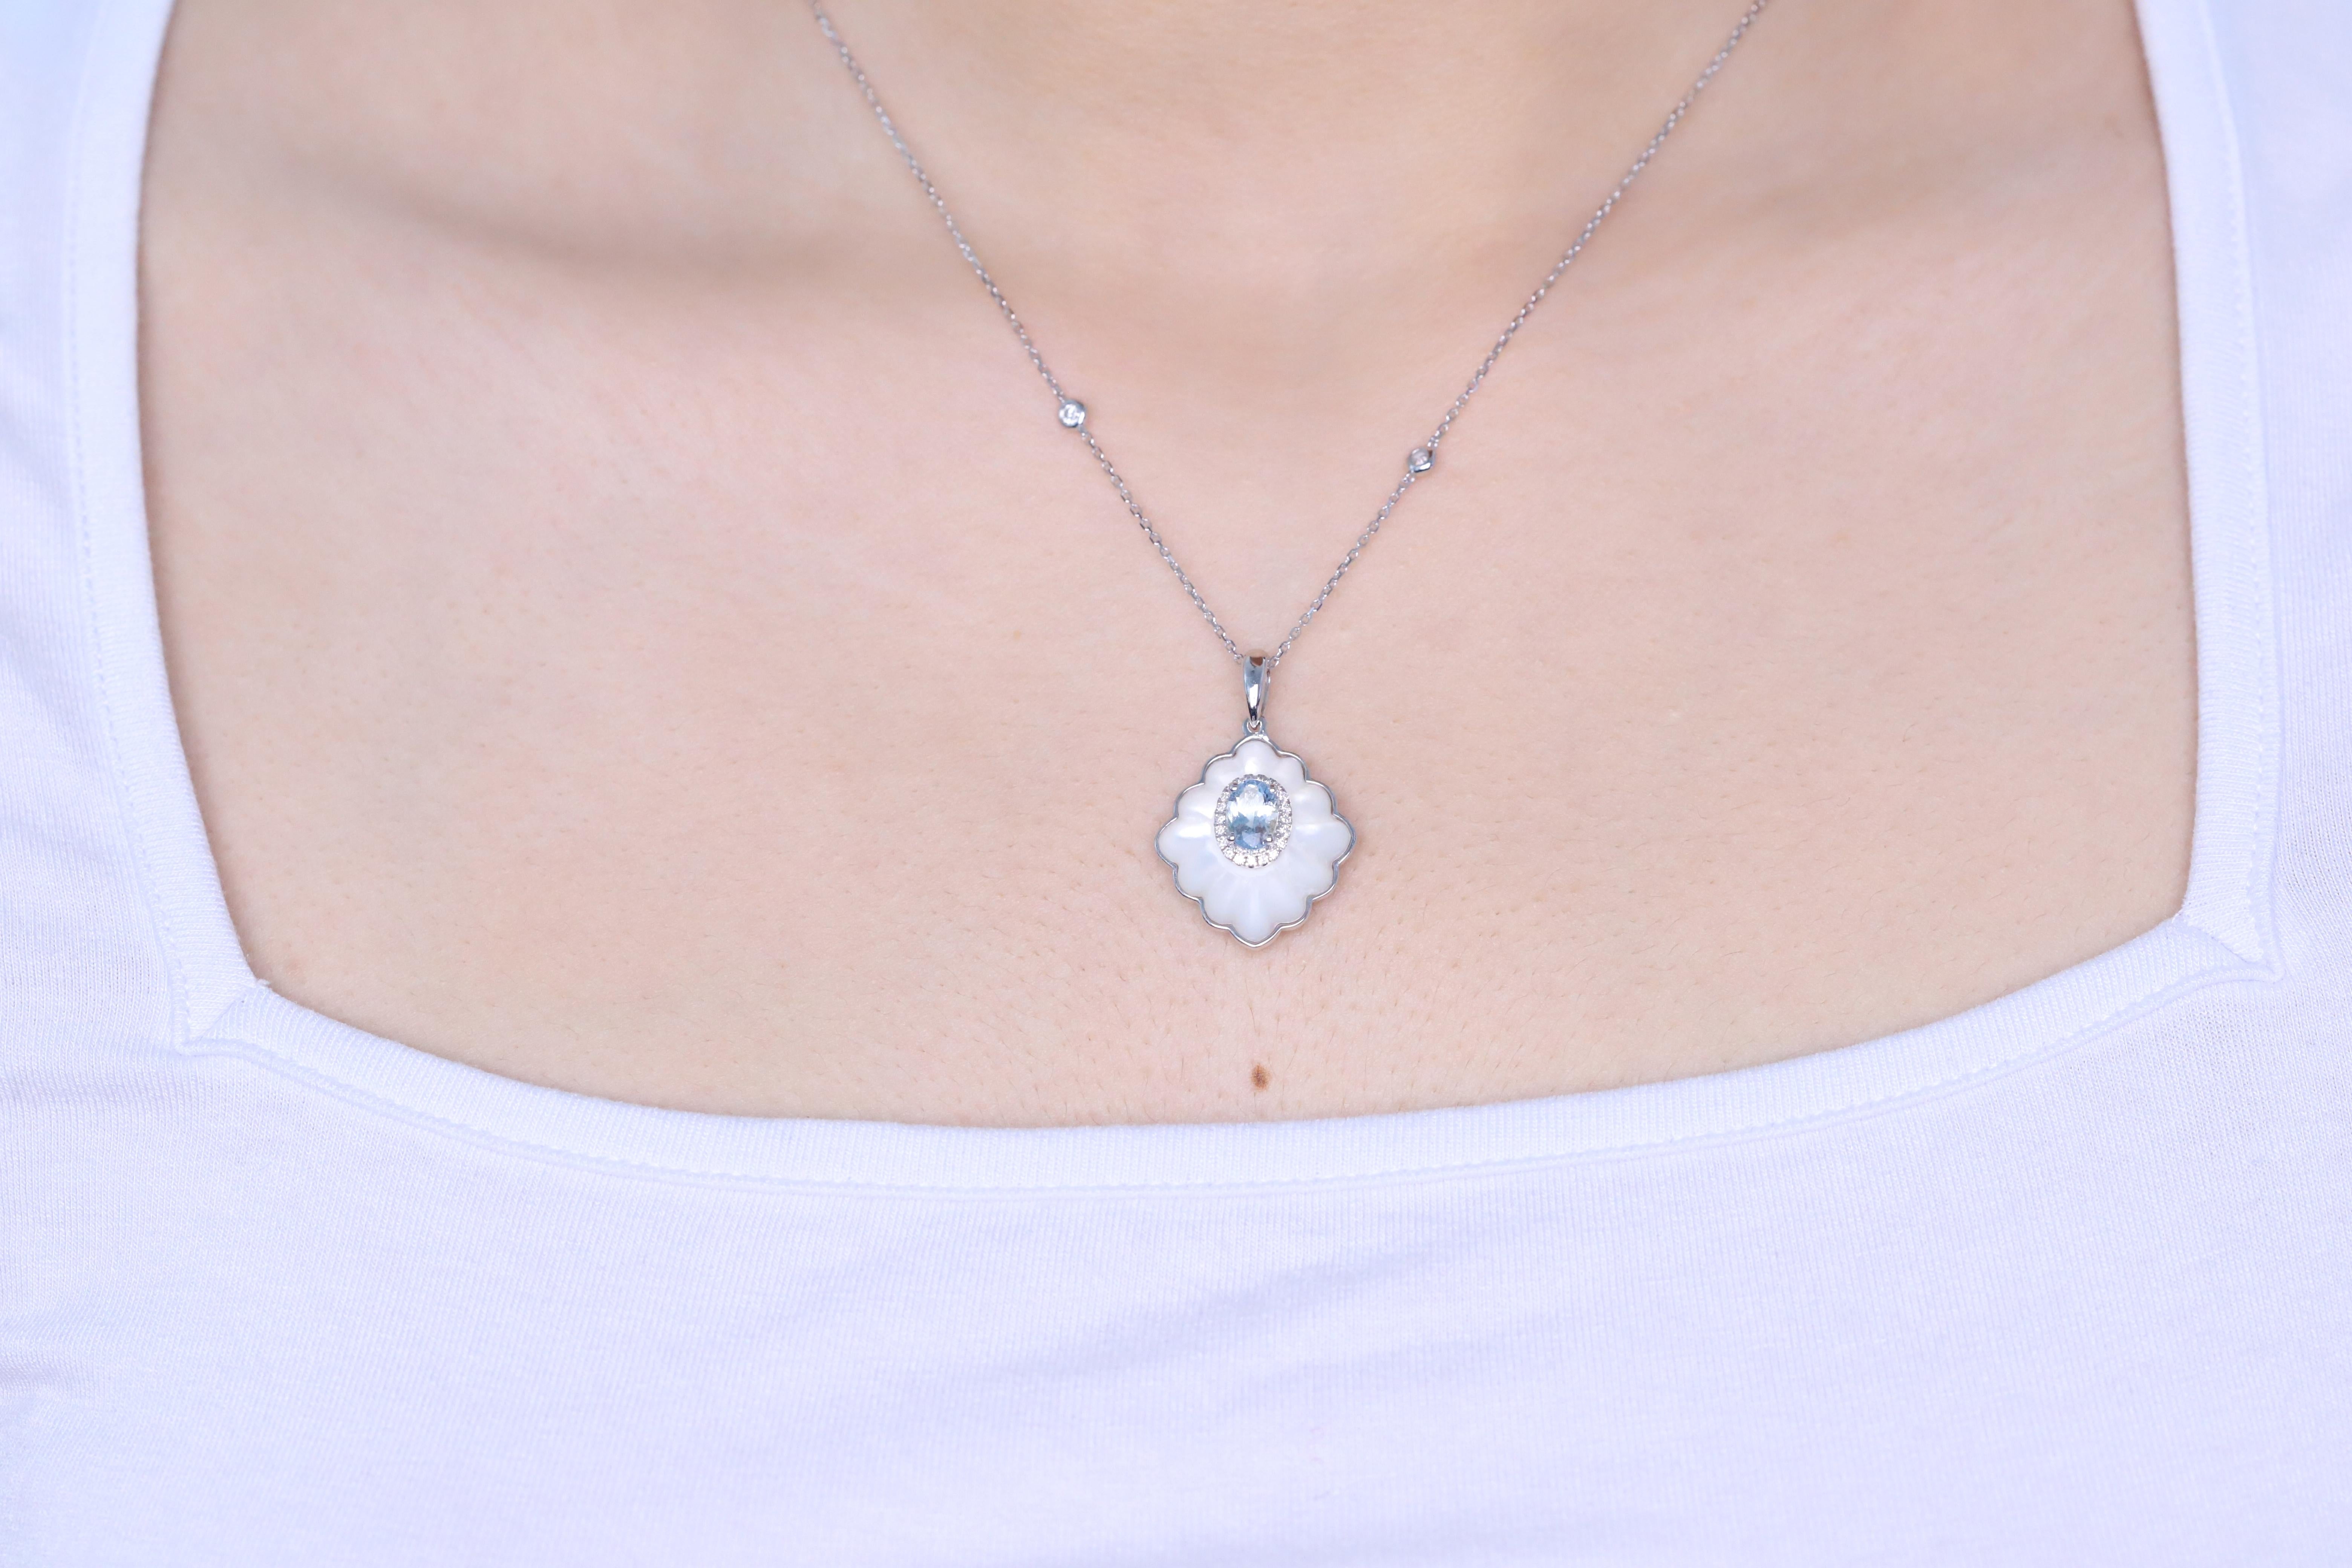 Decorate yourself in elegance with this Pendant is crafted from 14-karat White Gold by Gin & Grace. This Pendant is made up of oval-Cut Aquamarine (1 pcs) 0.75 carat, Fancy-cut Mother of Pearl Pink (1 pcs) 8.70 carat and Round-cut White Diamond (22